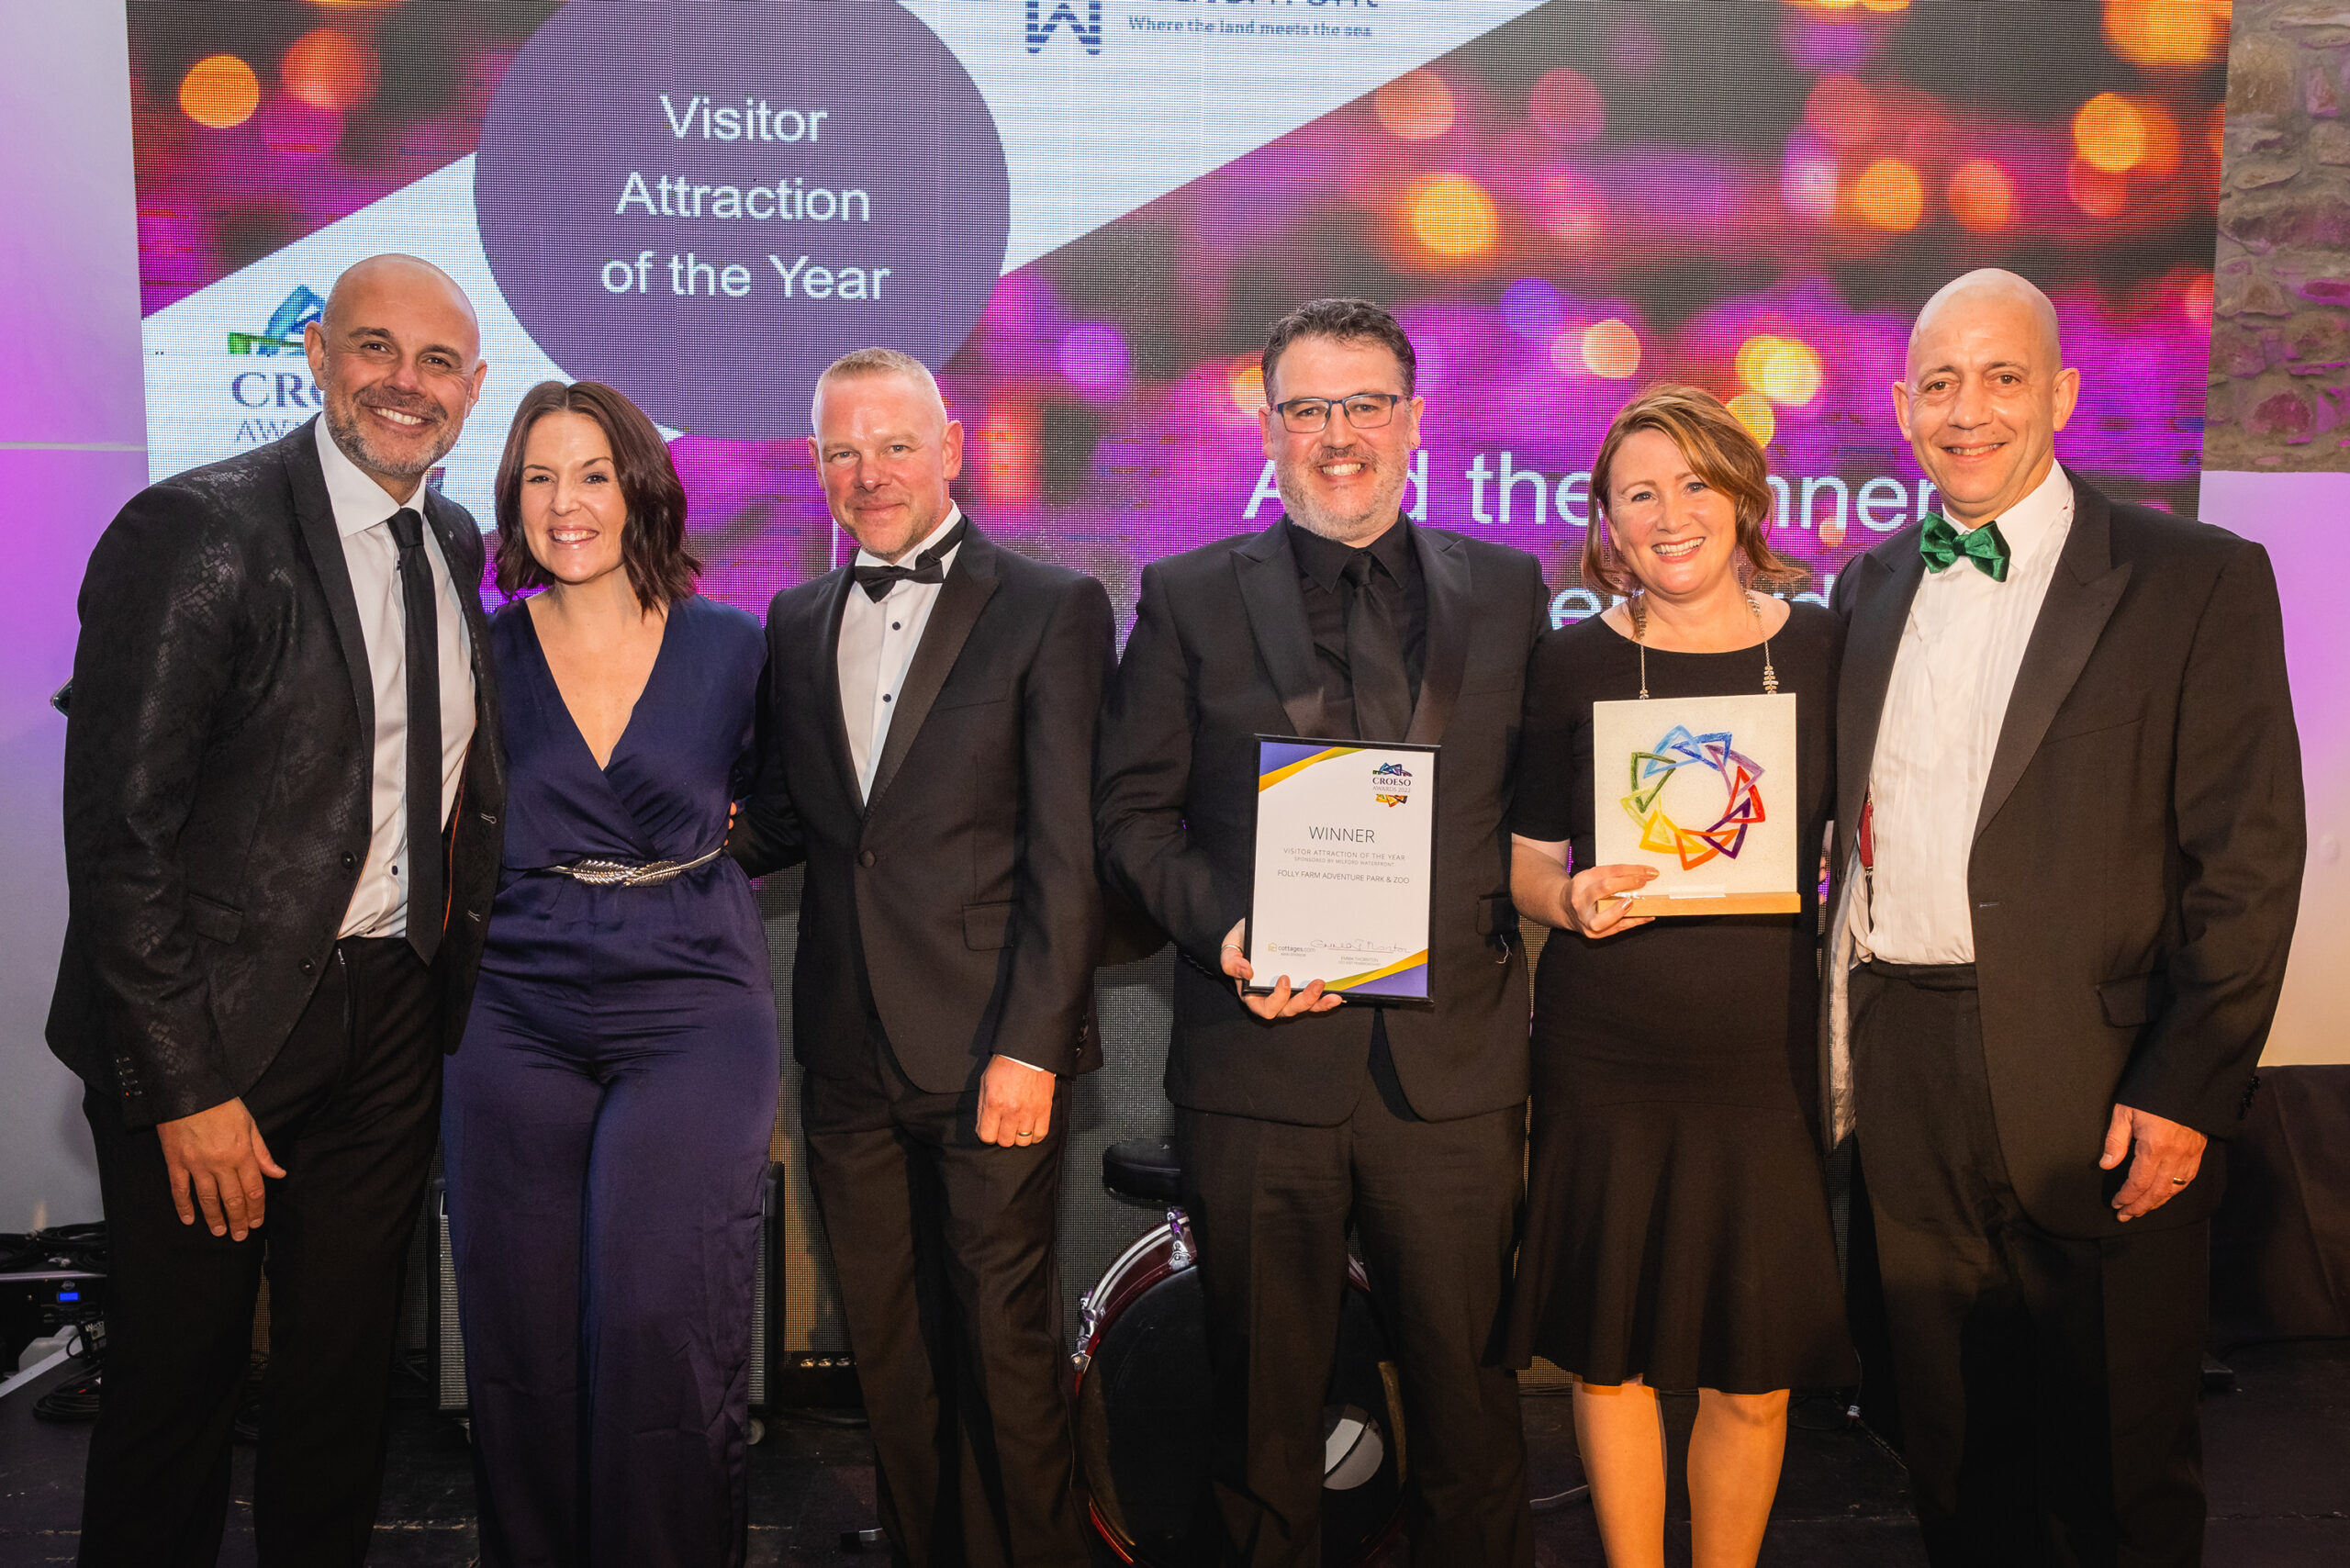 Visitor Attraction of the Year – Folly Farm Adventure Park & Zoo